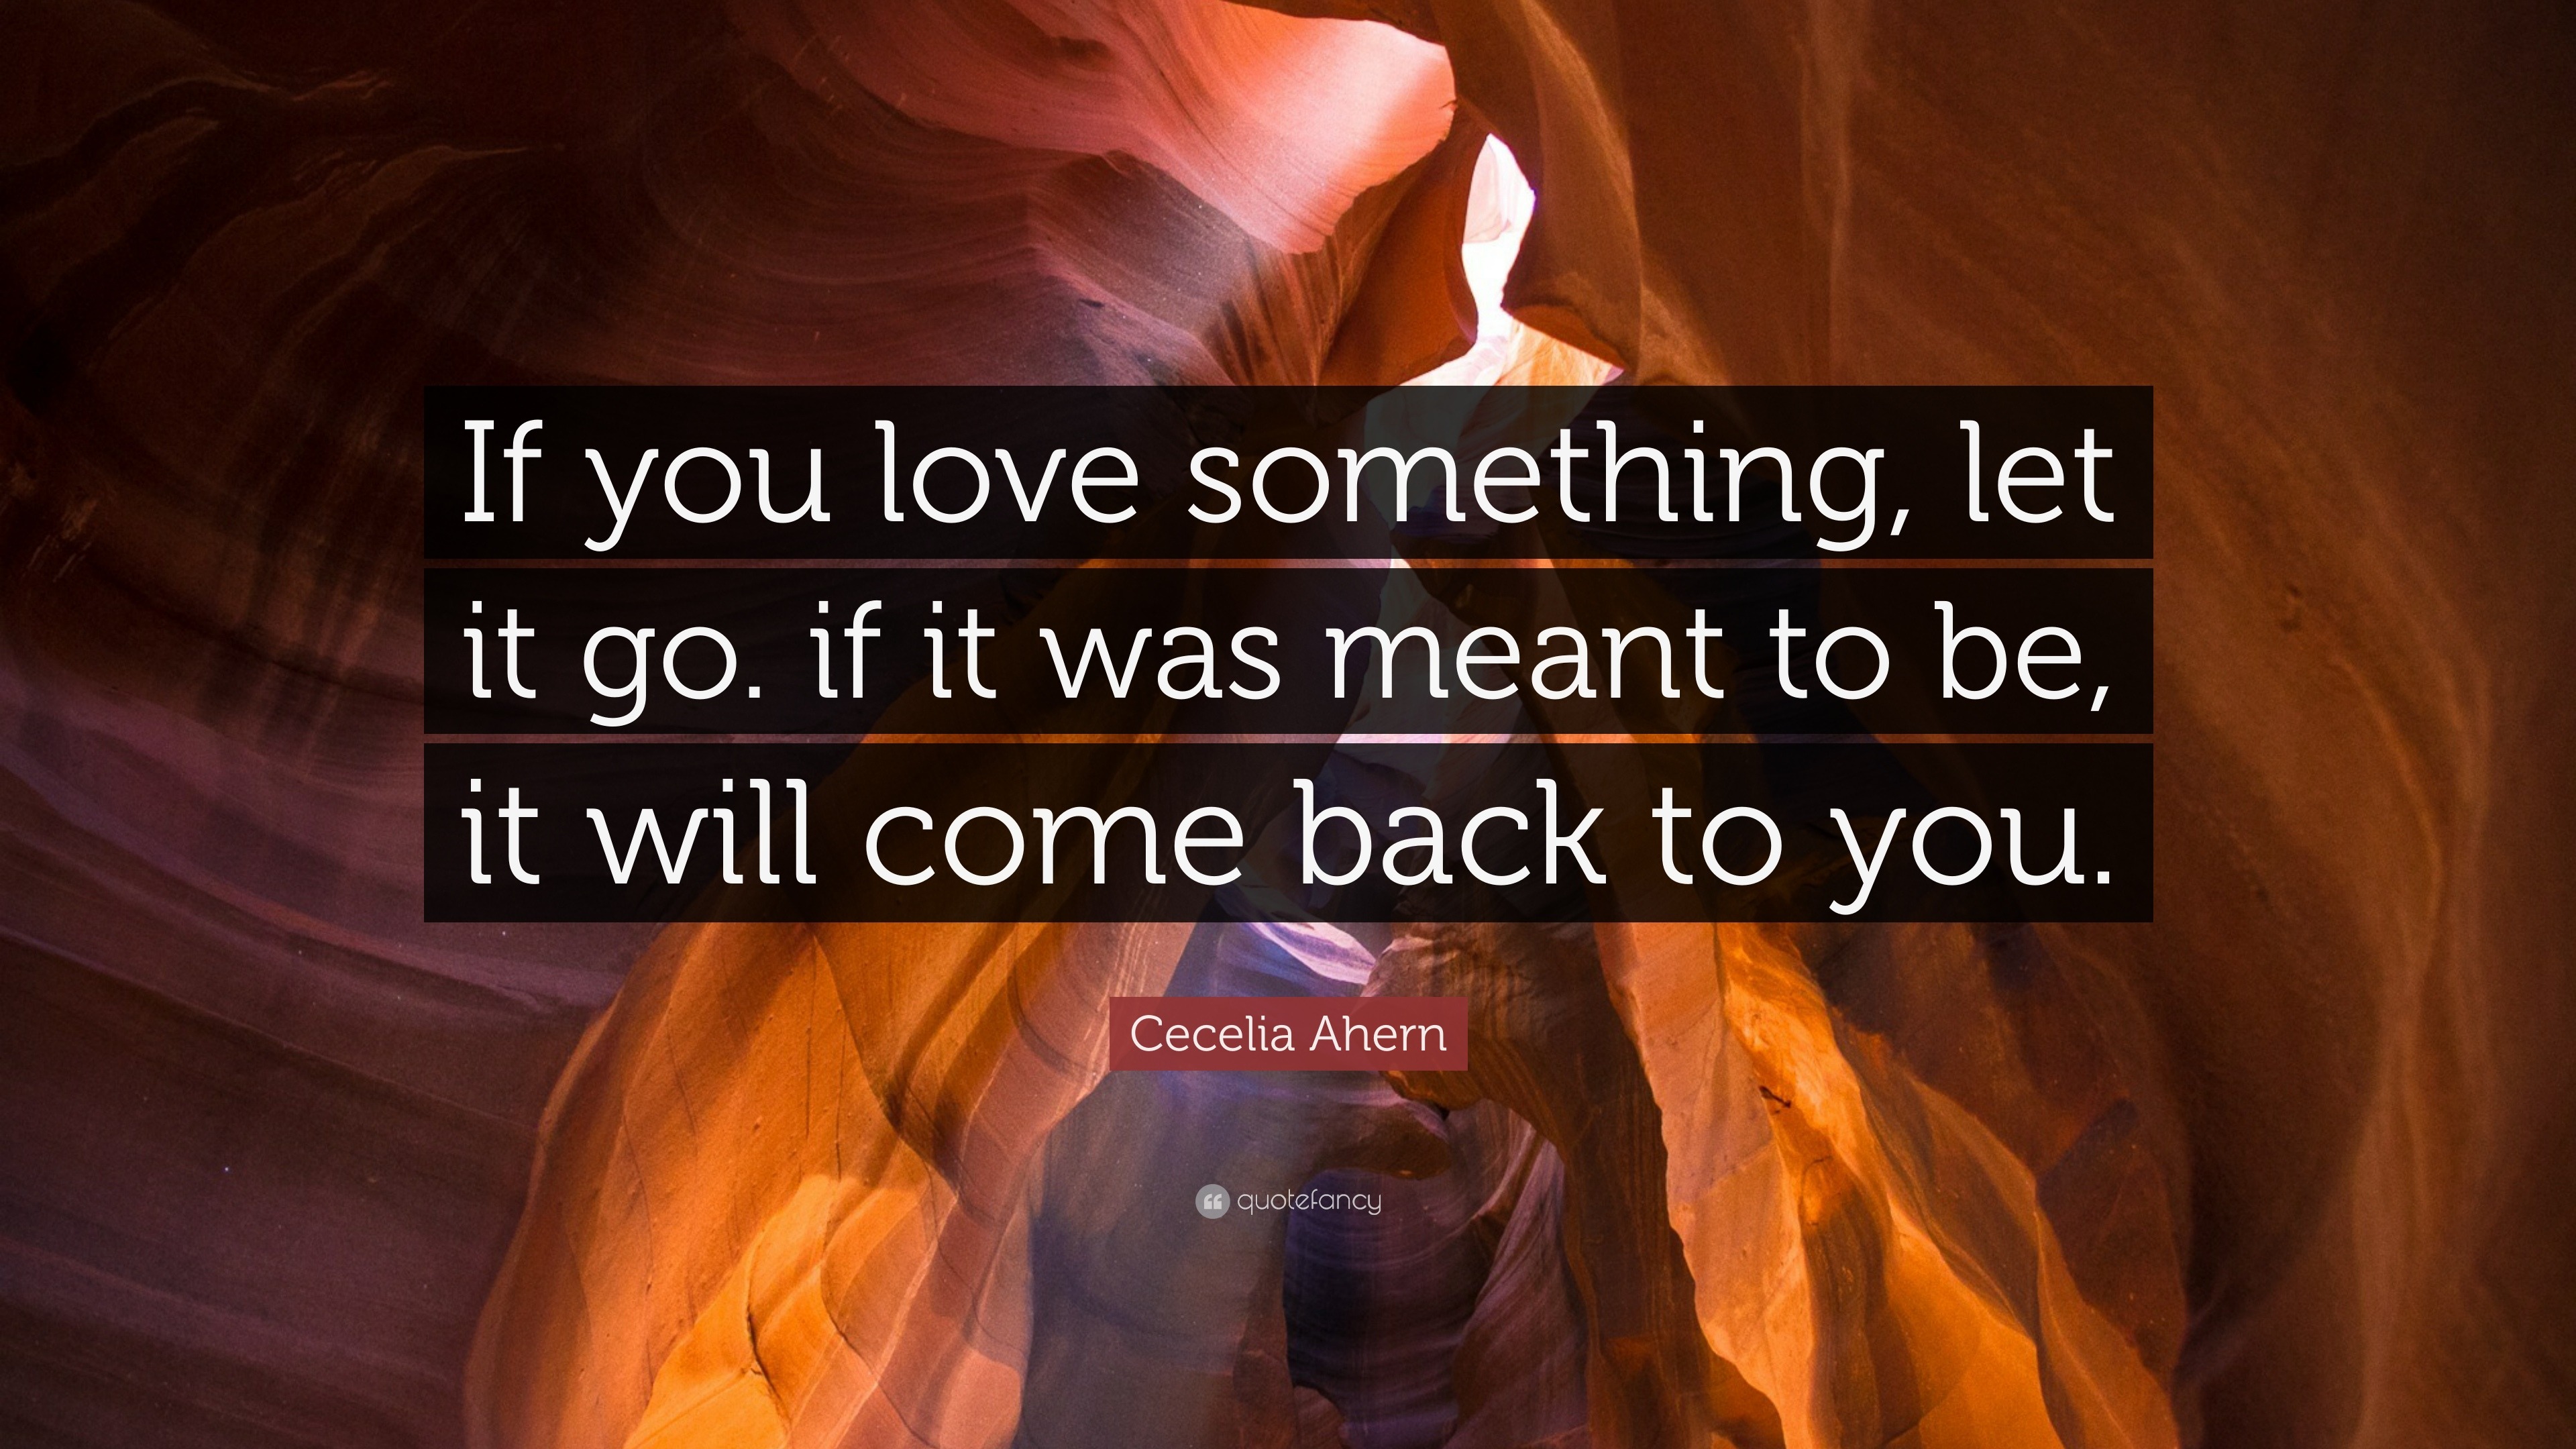 Cecelia Ahern Quote “If you love something let it go if it